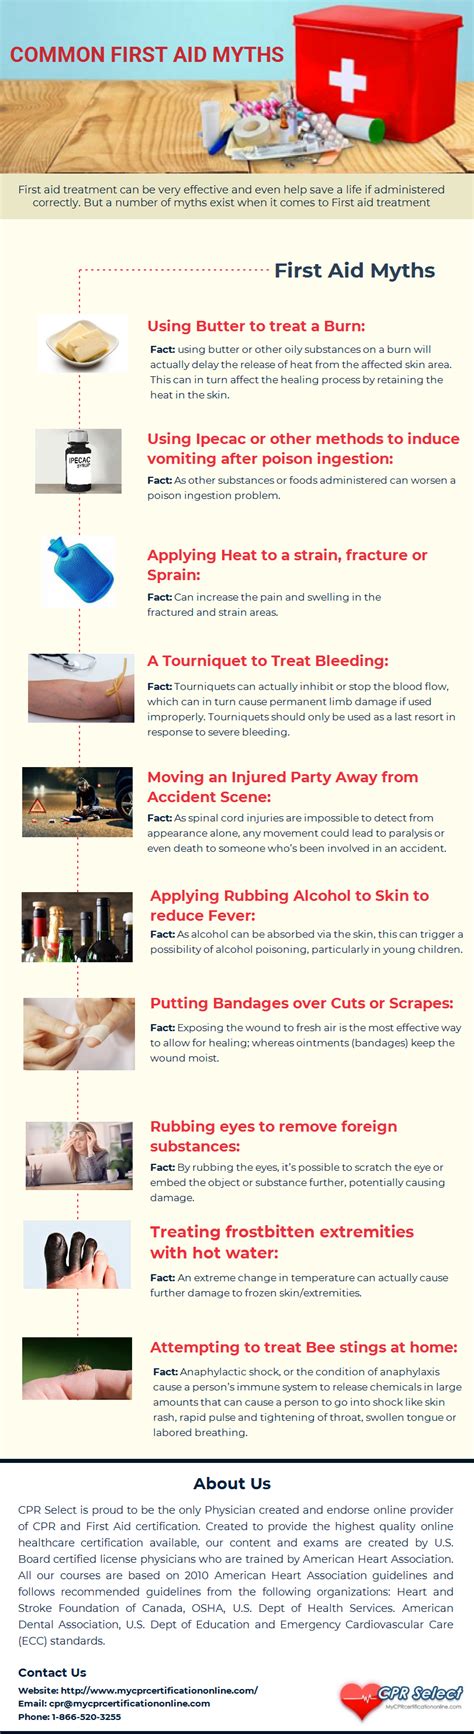 10 Common First Aid Myths And Mistakes Infographic By Bruse Rockwell Medium